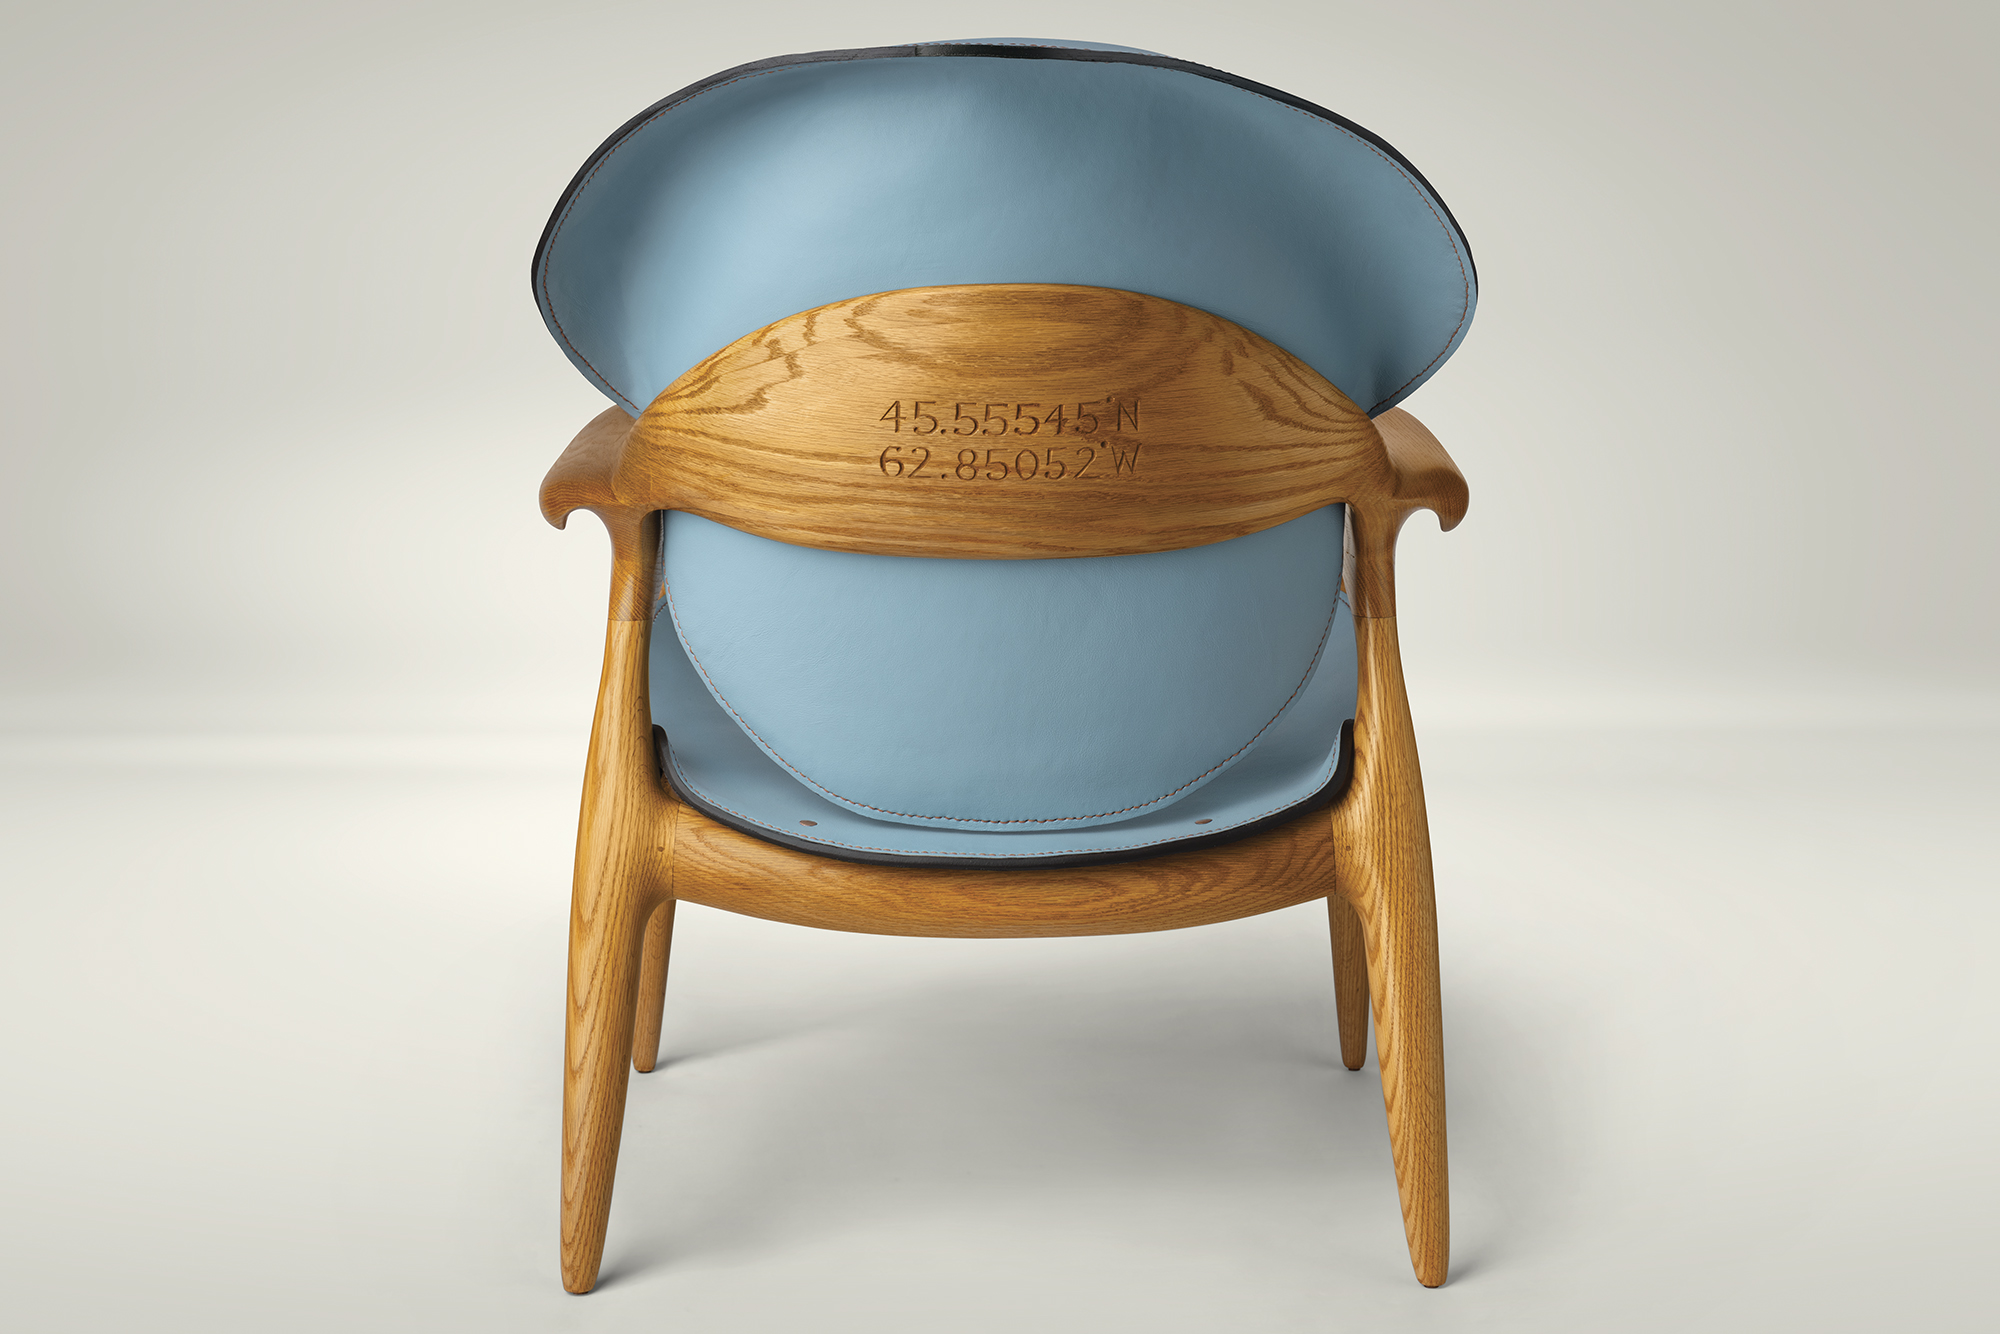 The Fiona Chair, designed by Jonathan Otter and Timberland, to help hurricane relief in Nova Scotia